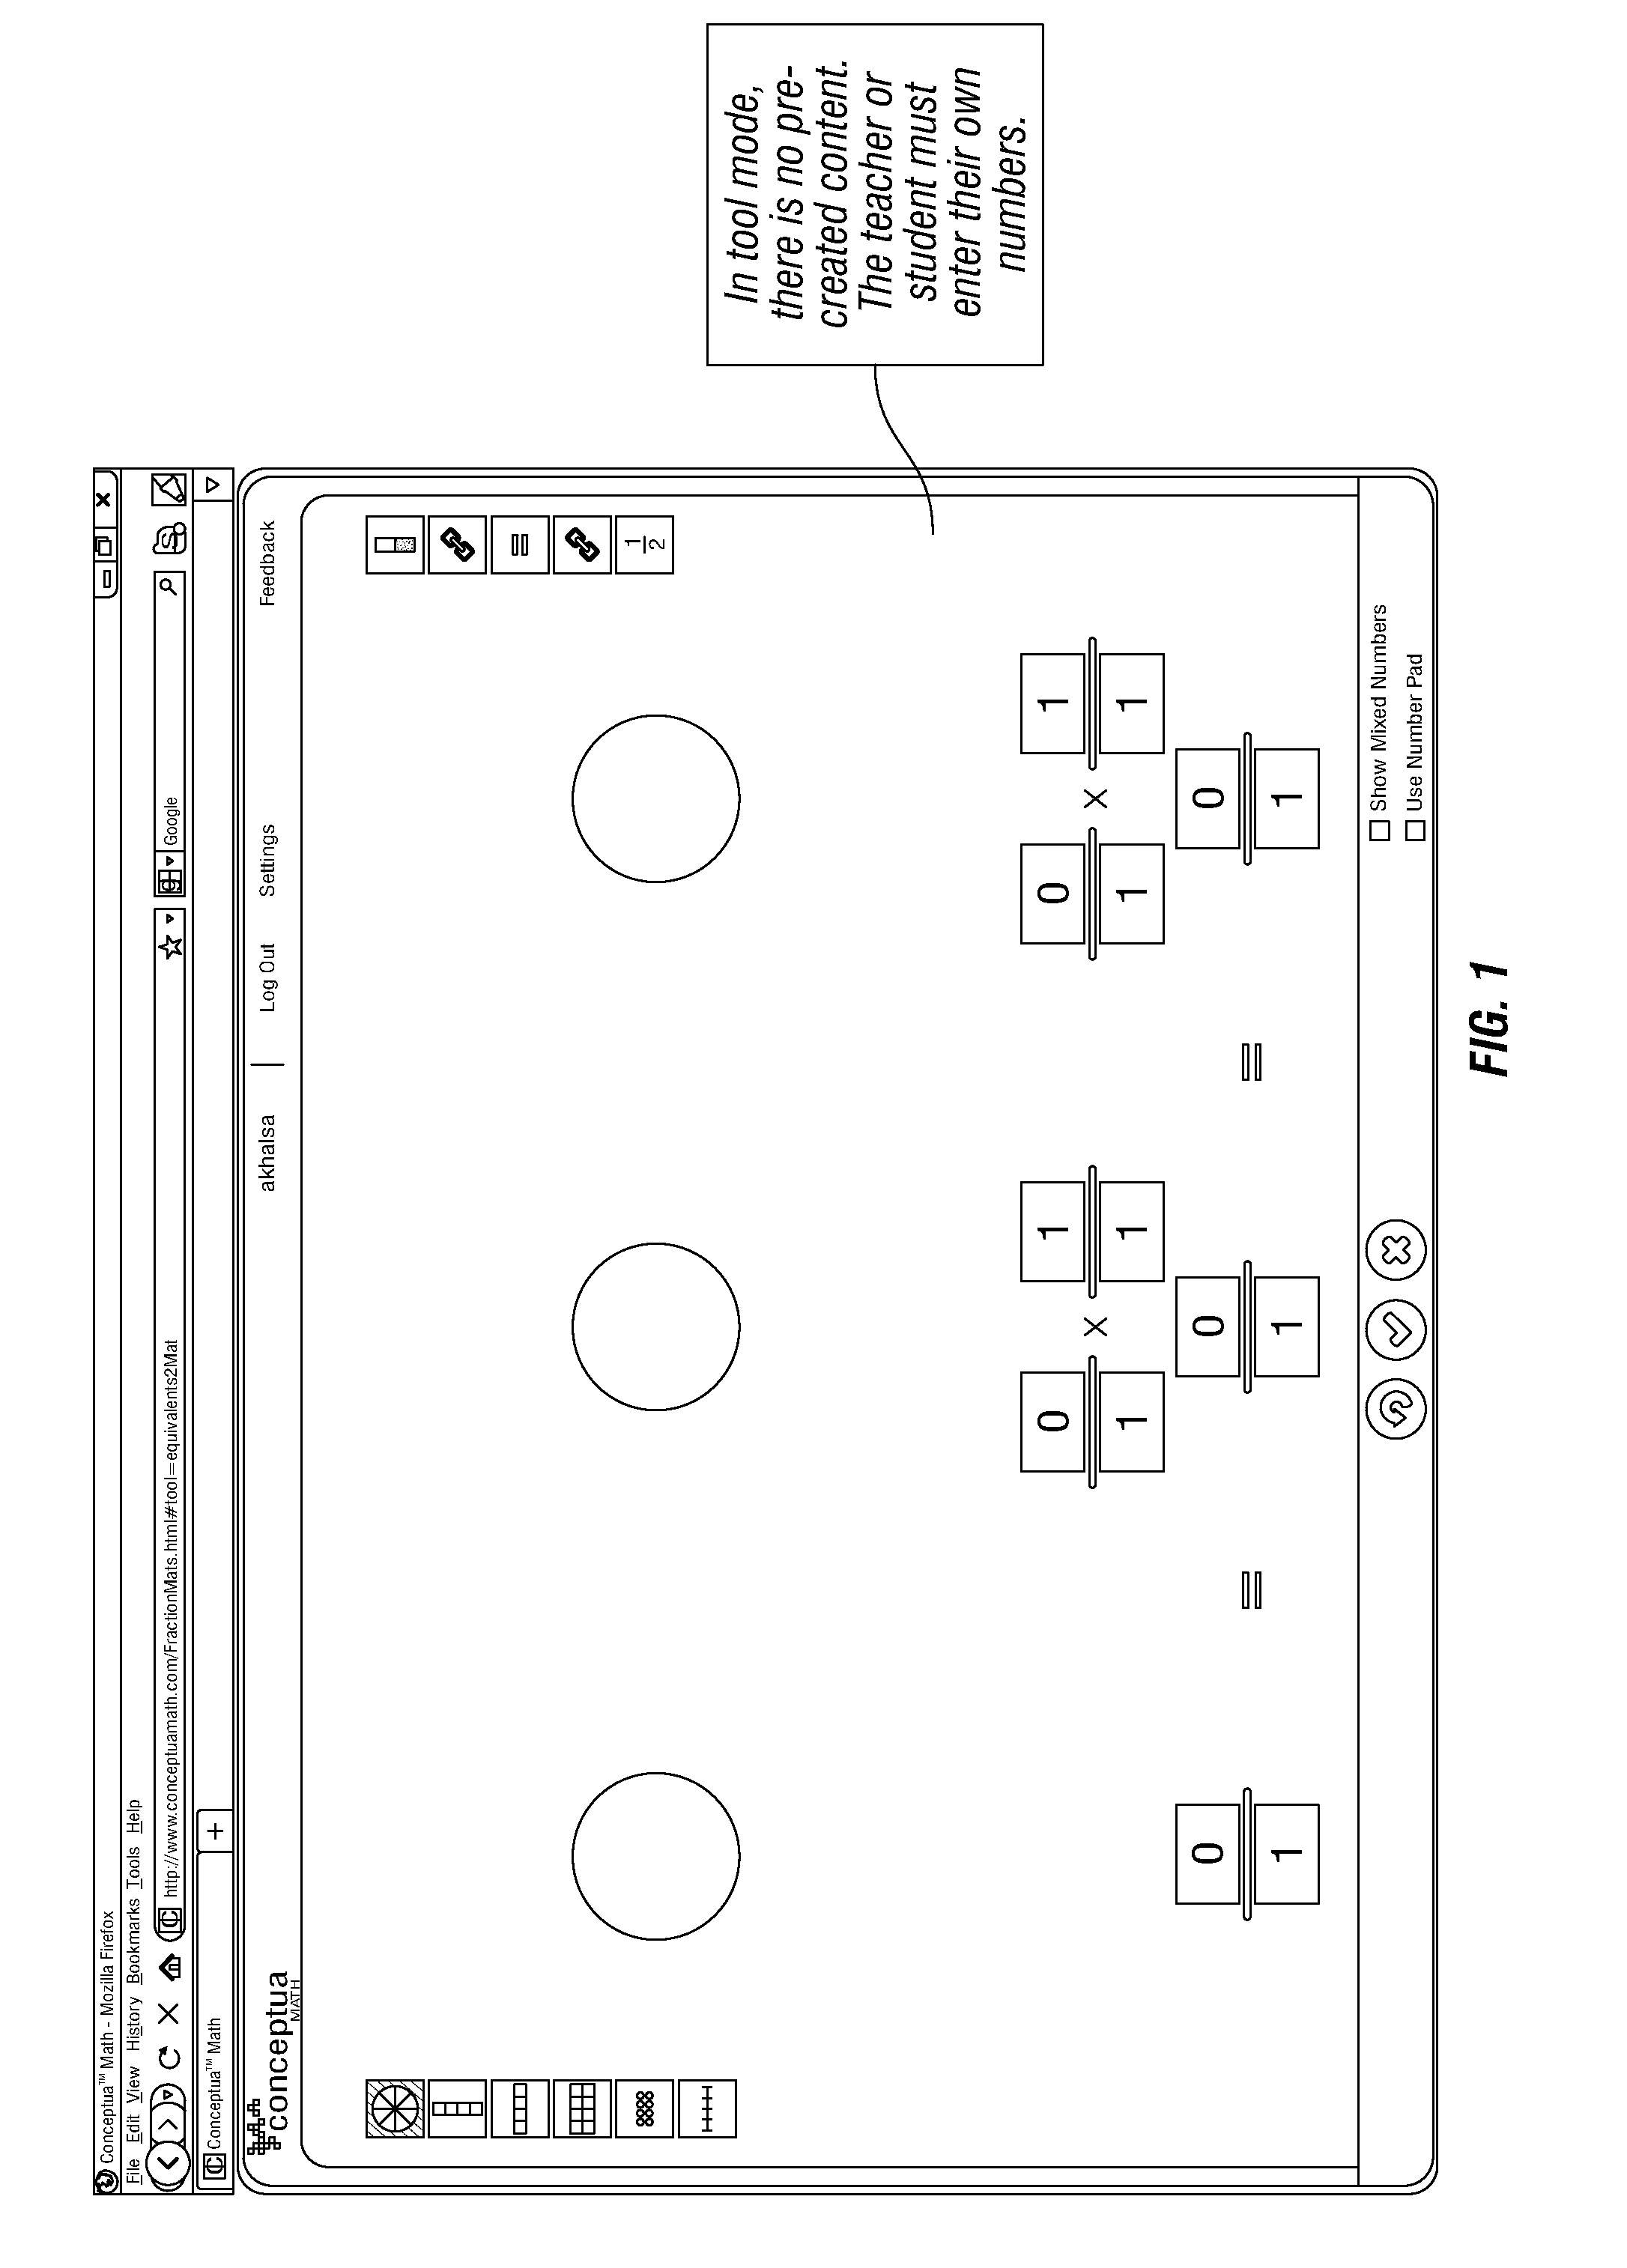 Apparatus and method for tools for mathematics instruction